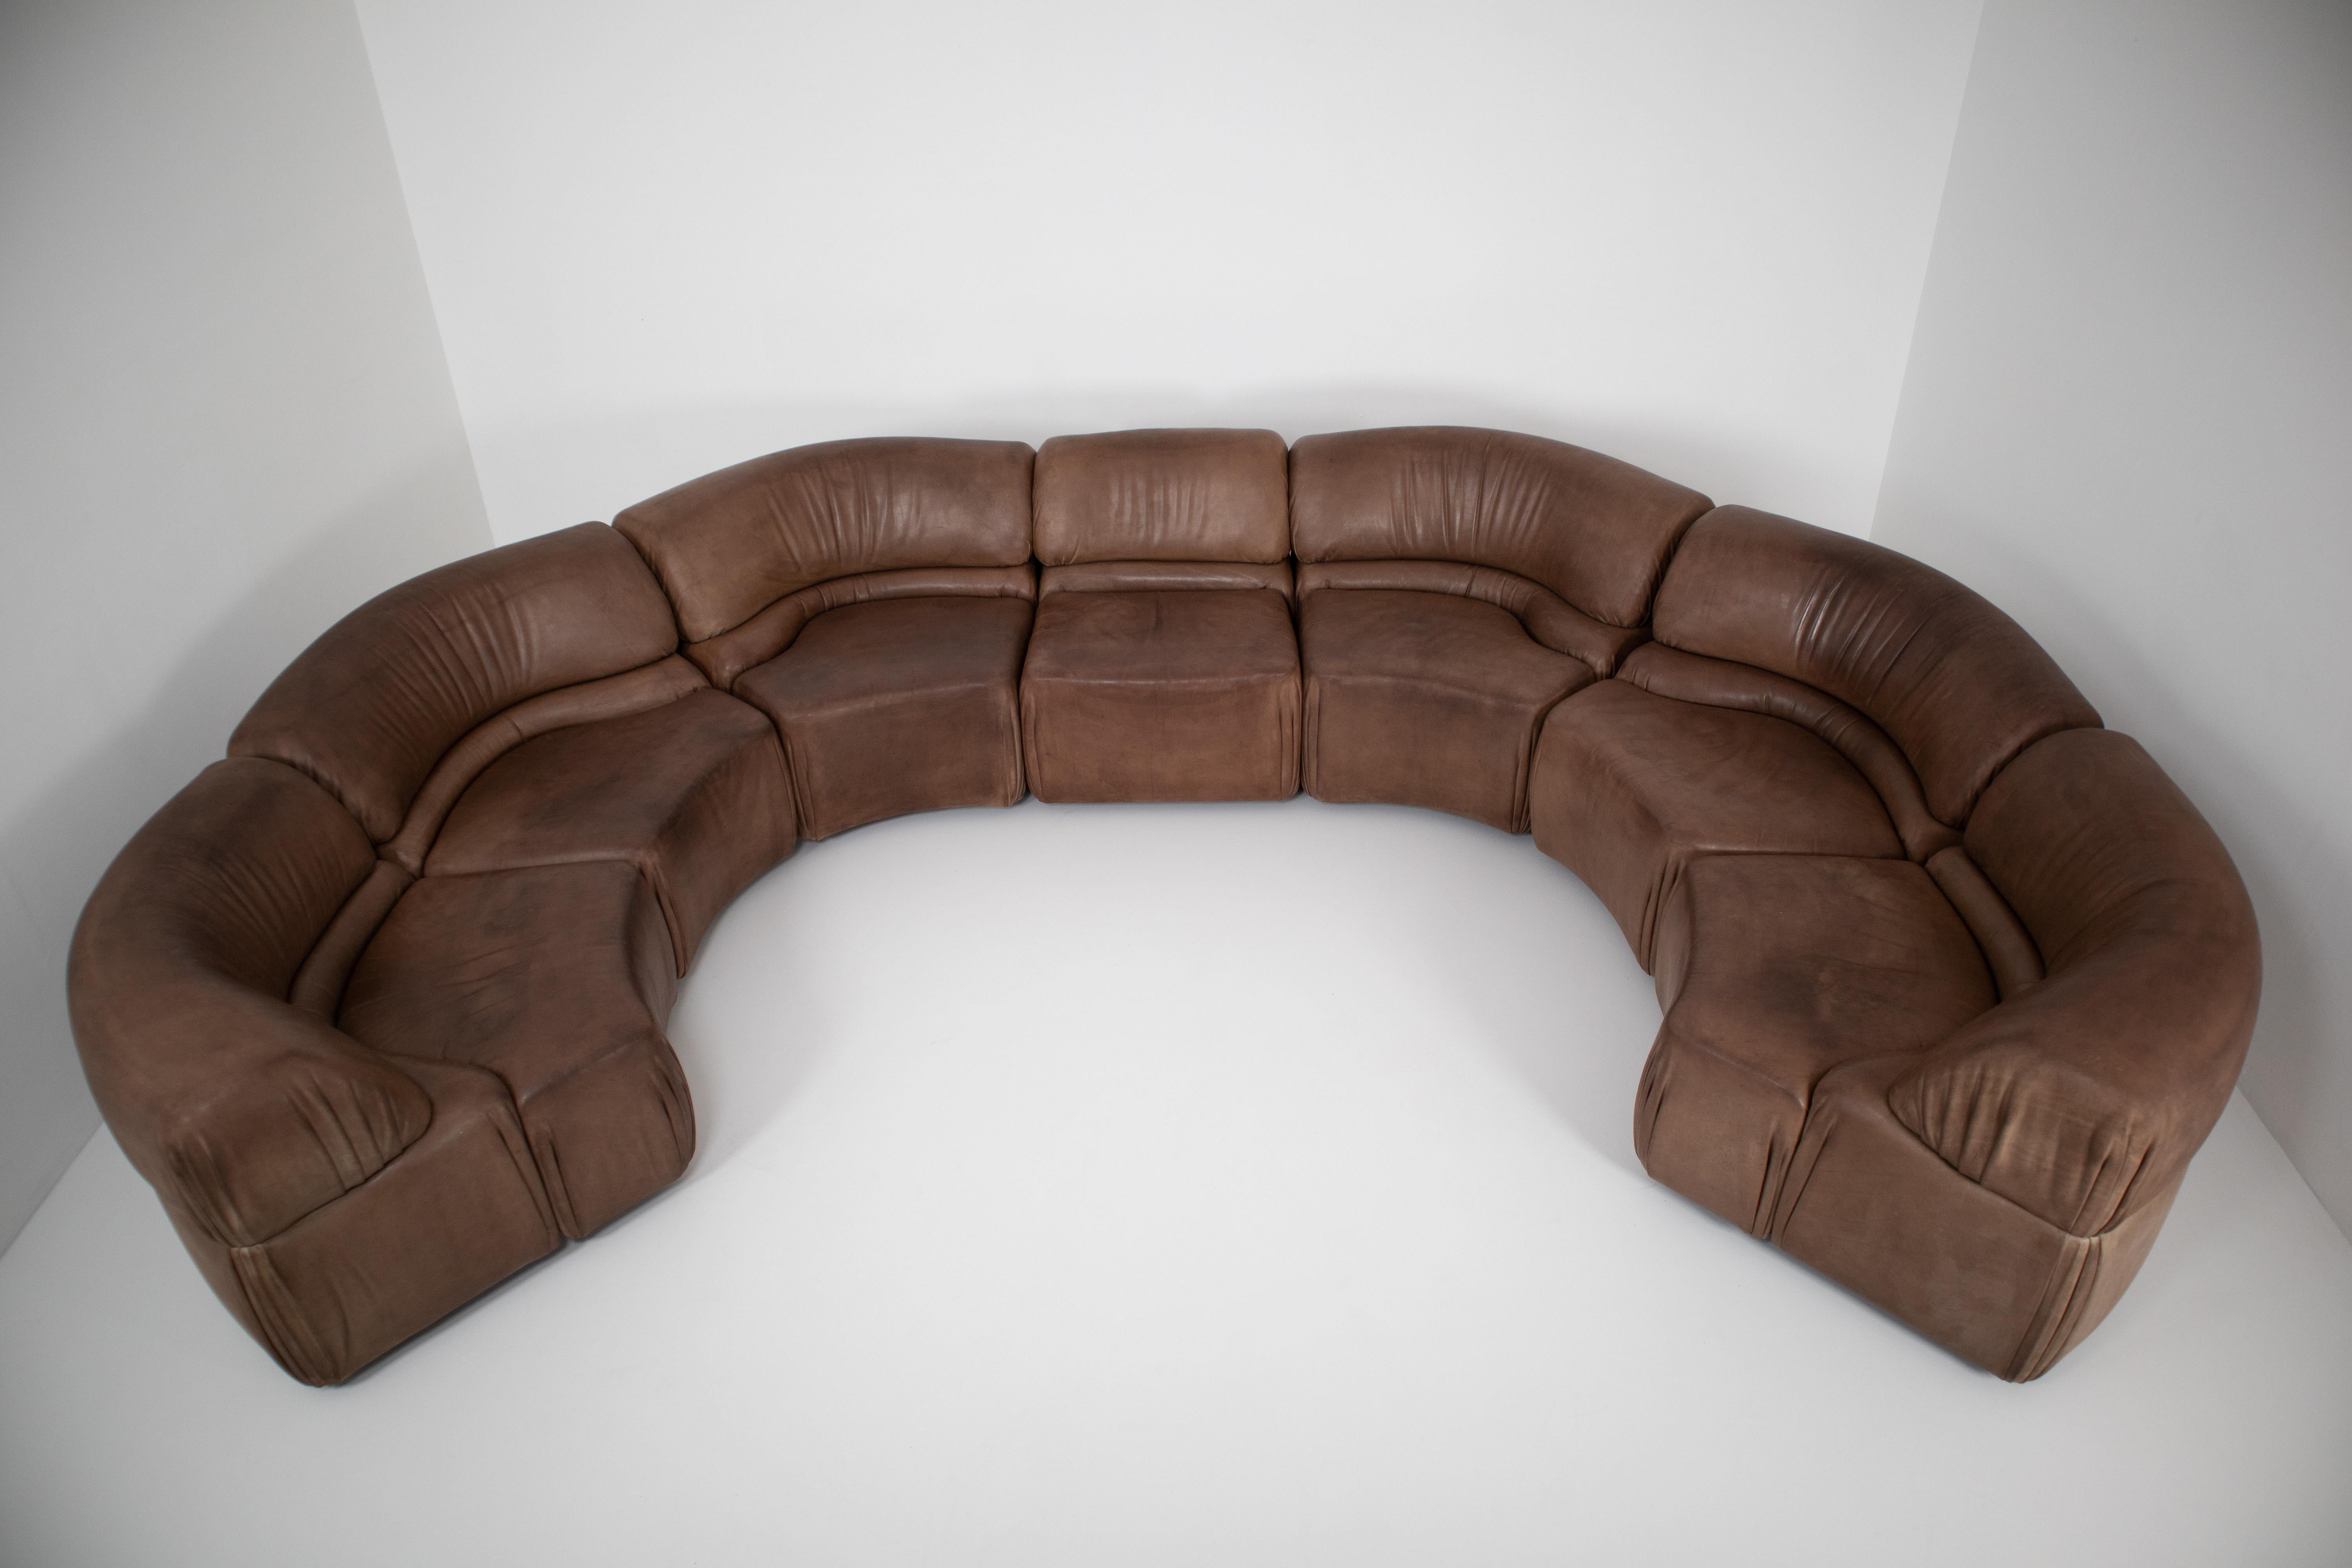 Comfortable so called 'Cosmos' elemented sofa designed and manufactured by De Sede, Switzerland, 1970. This sofa has a wooden structure stuffed with foam and covered with buffalo leather. The sofa is in patinated brown leather and is in good